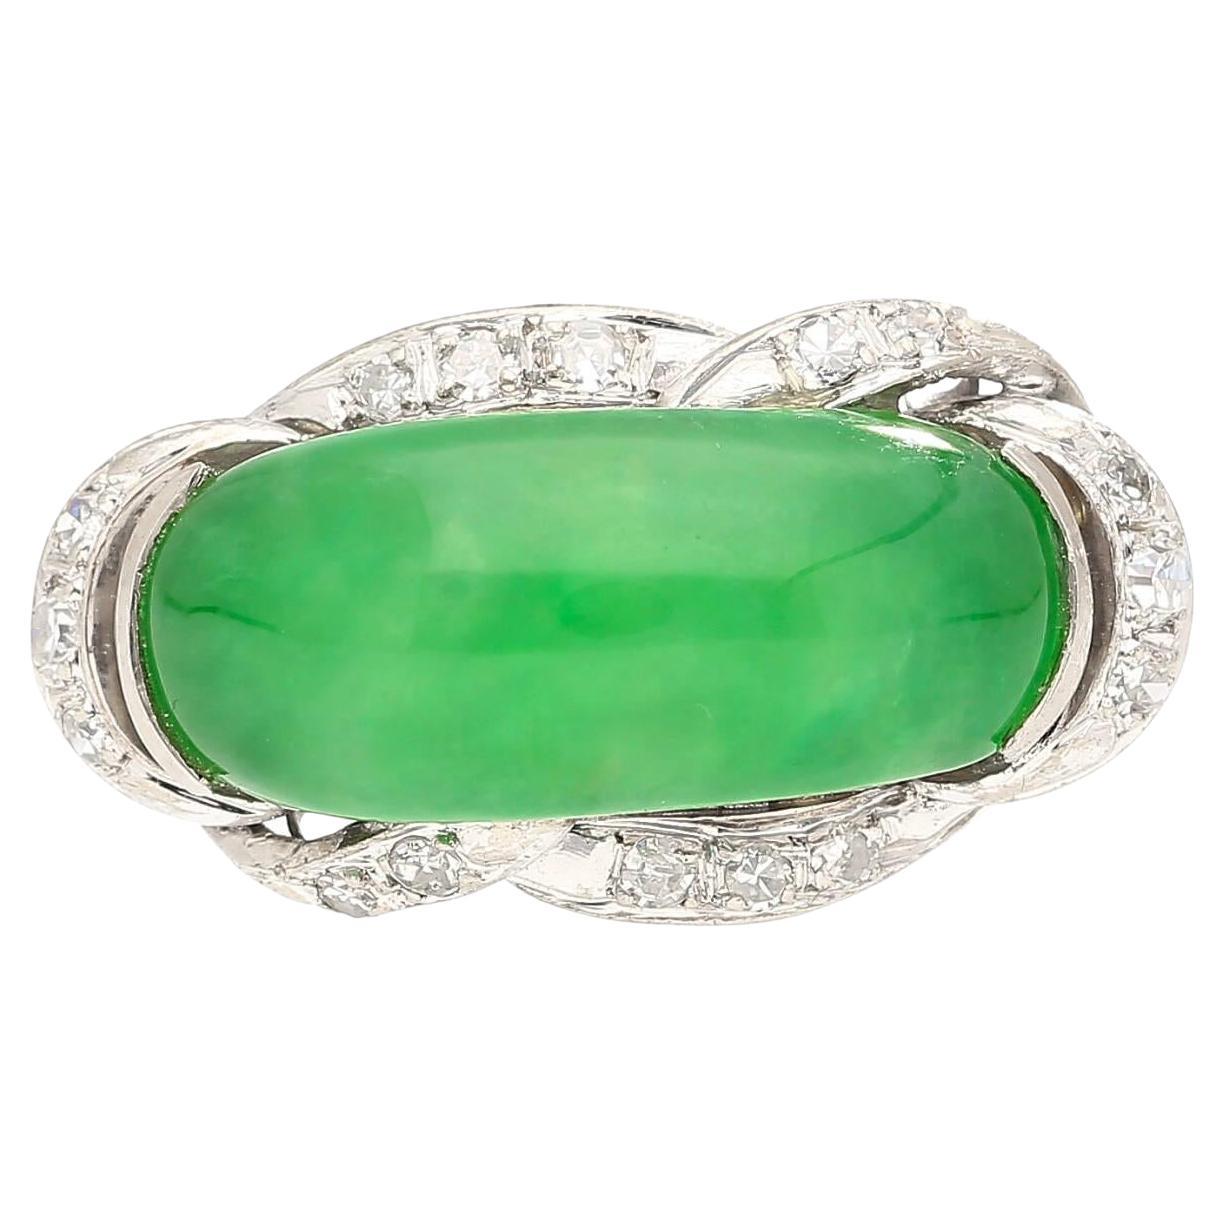 Natural Jade & Diamond in 18K White Gold Ring.

This ring features a natural, bright green grade 